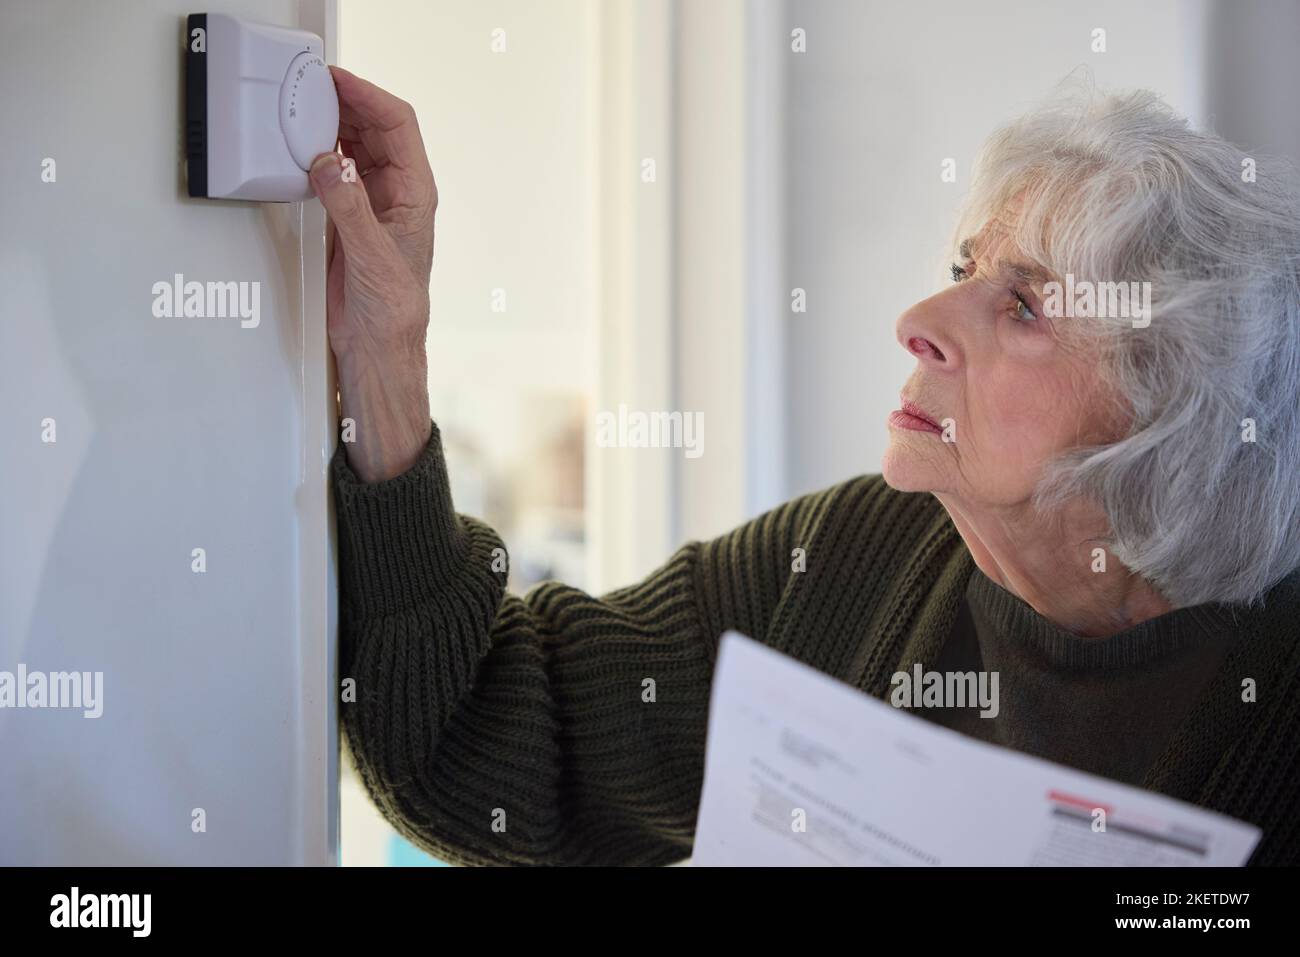 Worried Senior Woman With Bill Turning Down Central Heating Thermostat At Home In Energy Crisis Stock Photo